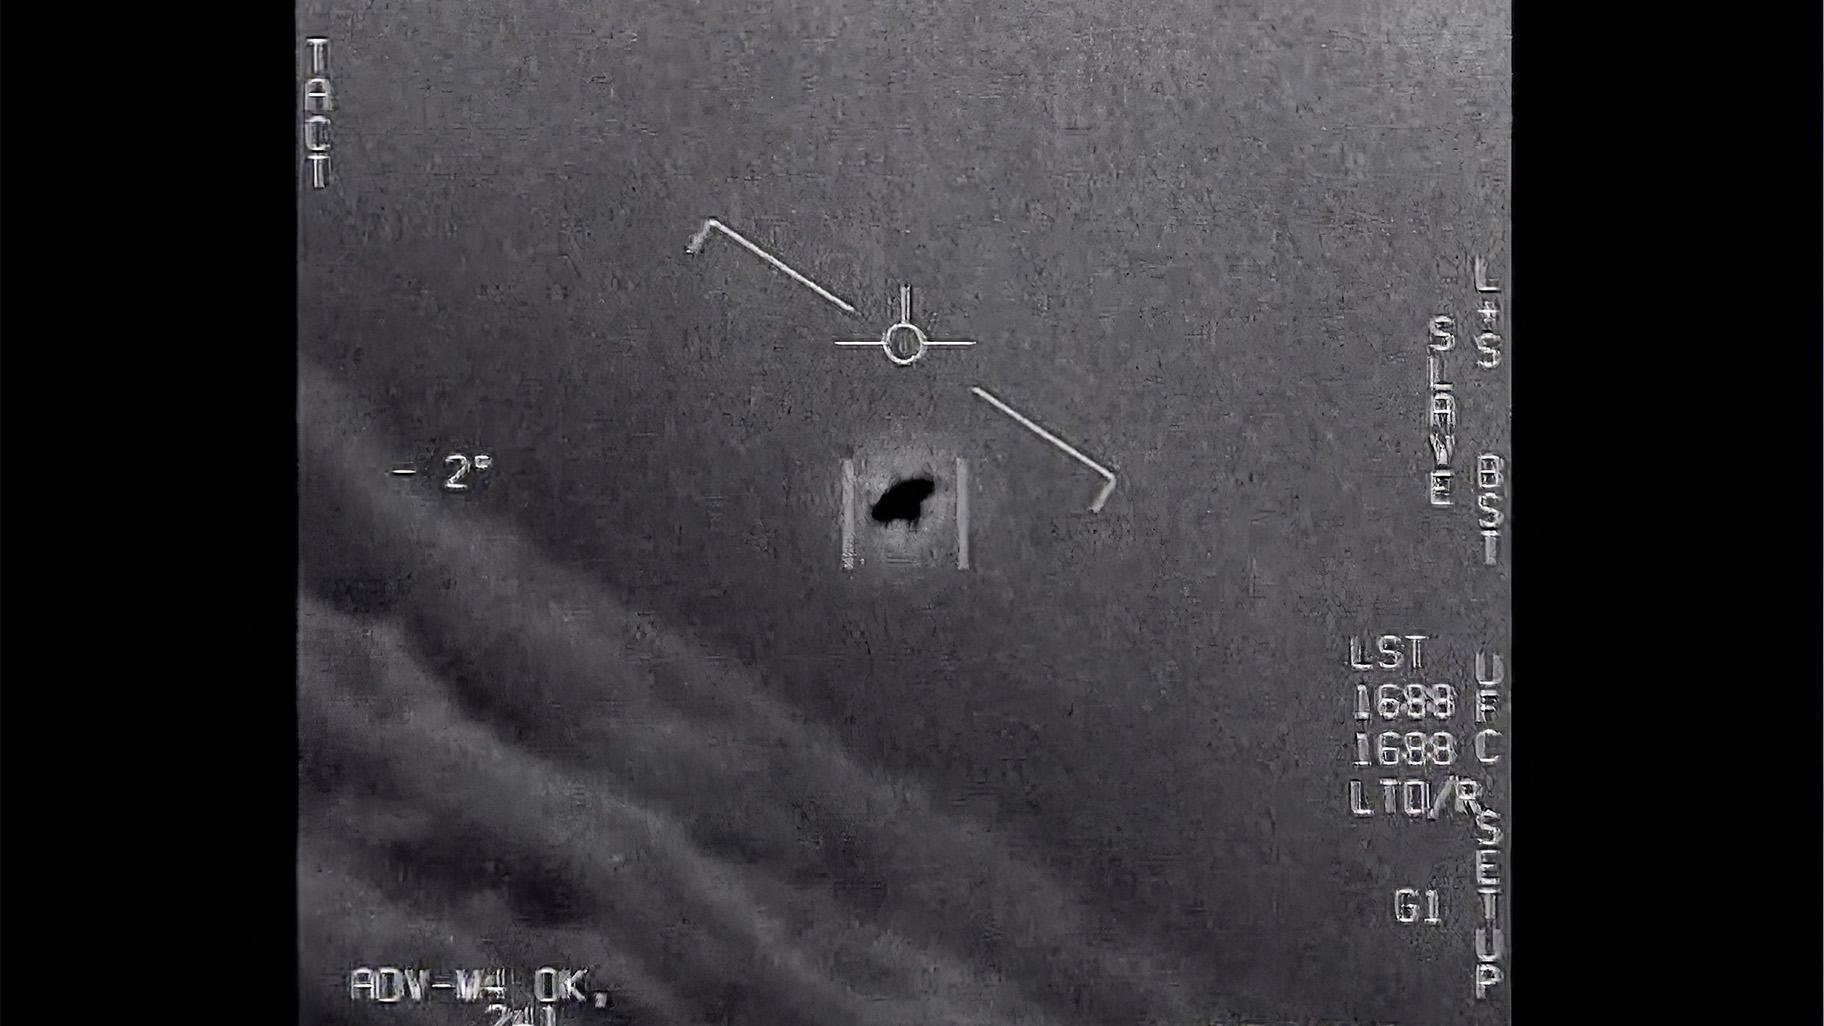 The image from video provided by the Department of Defense labelled Gimbal, from 2015, an unexplained object is seen at center as it is tracked as it soars high along the clouds, traveling against the wind. (Department of Defense via AP)